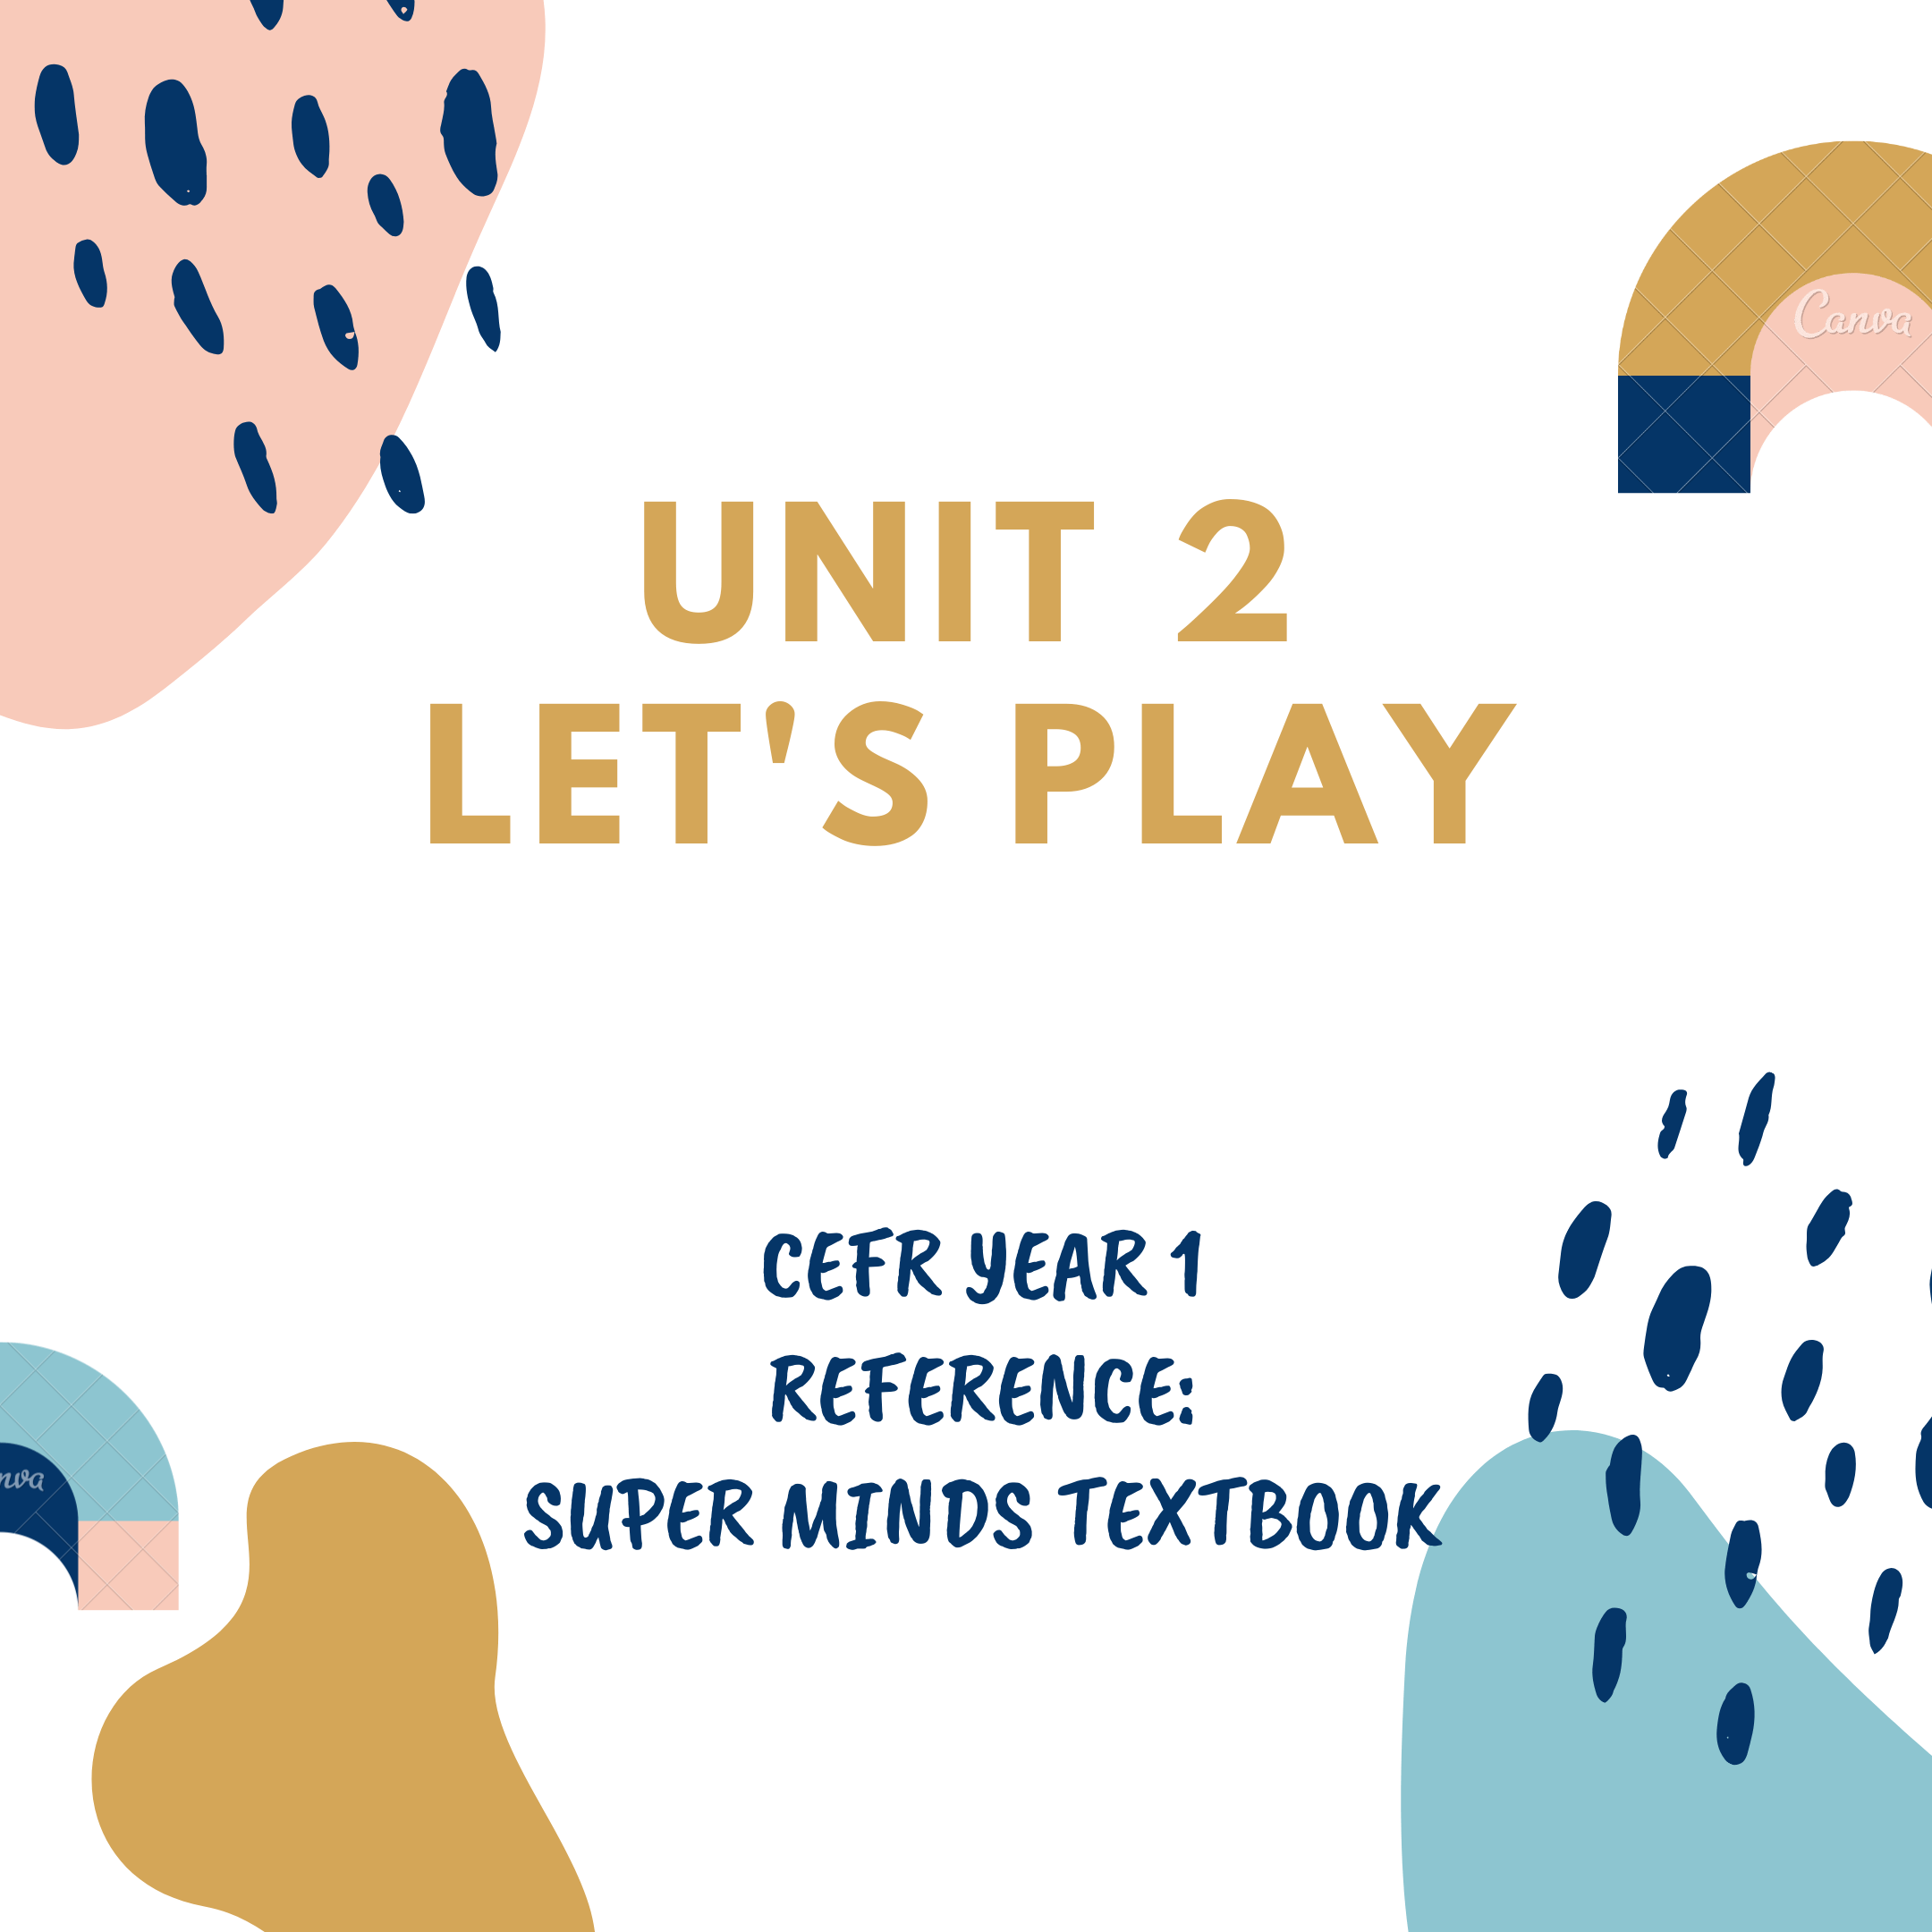 cefr-year-1-unit-2-let-s-play-2-6k-plays-quizizz